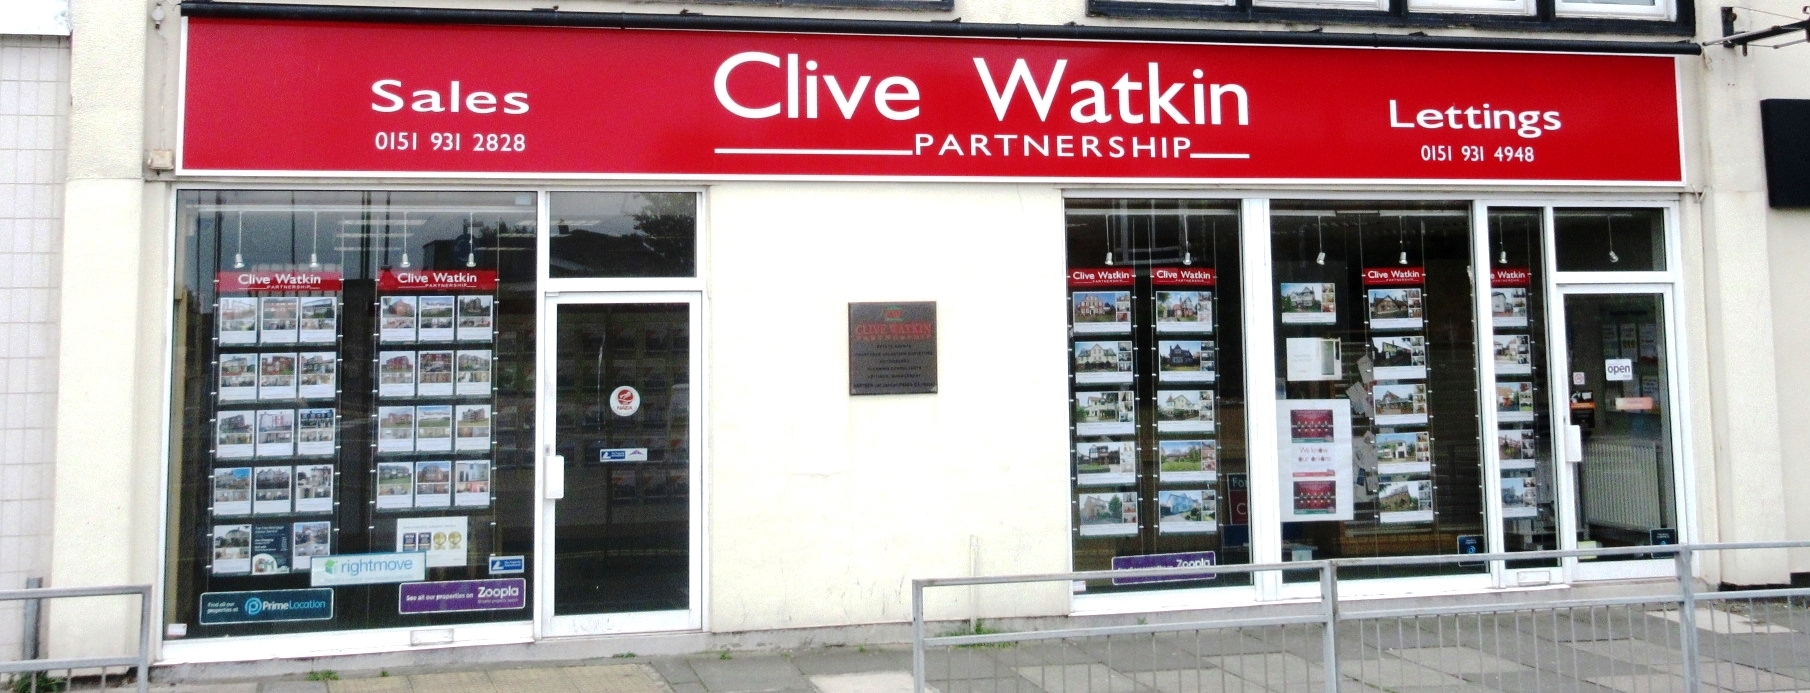 Clive Watkin Sales and Letting Agents Crosby Liverpool 01513 211063